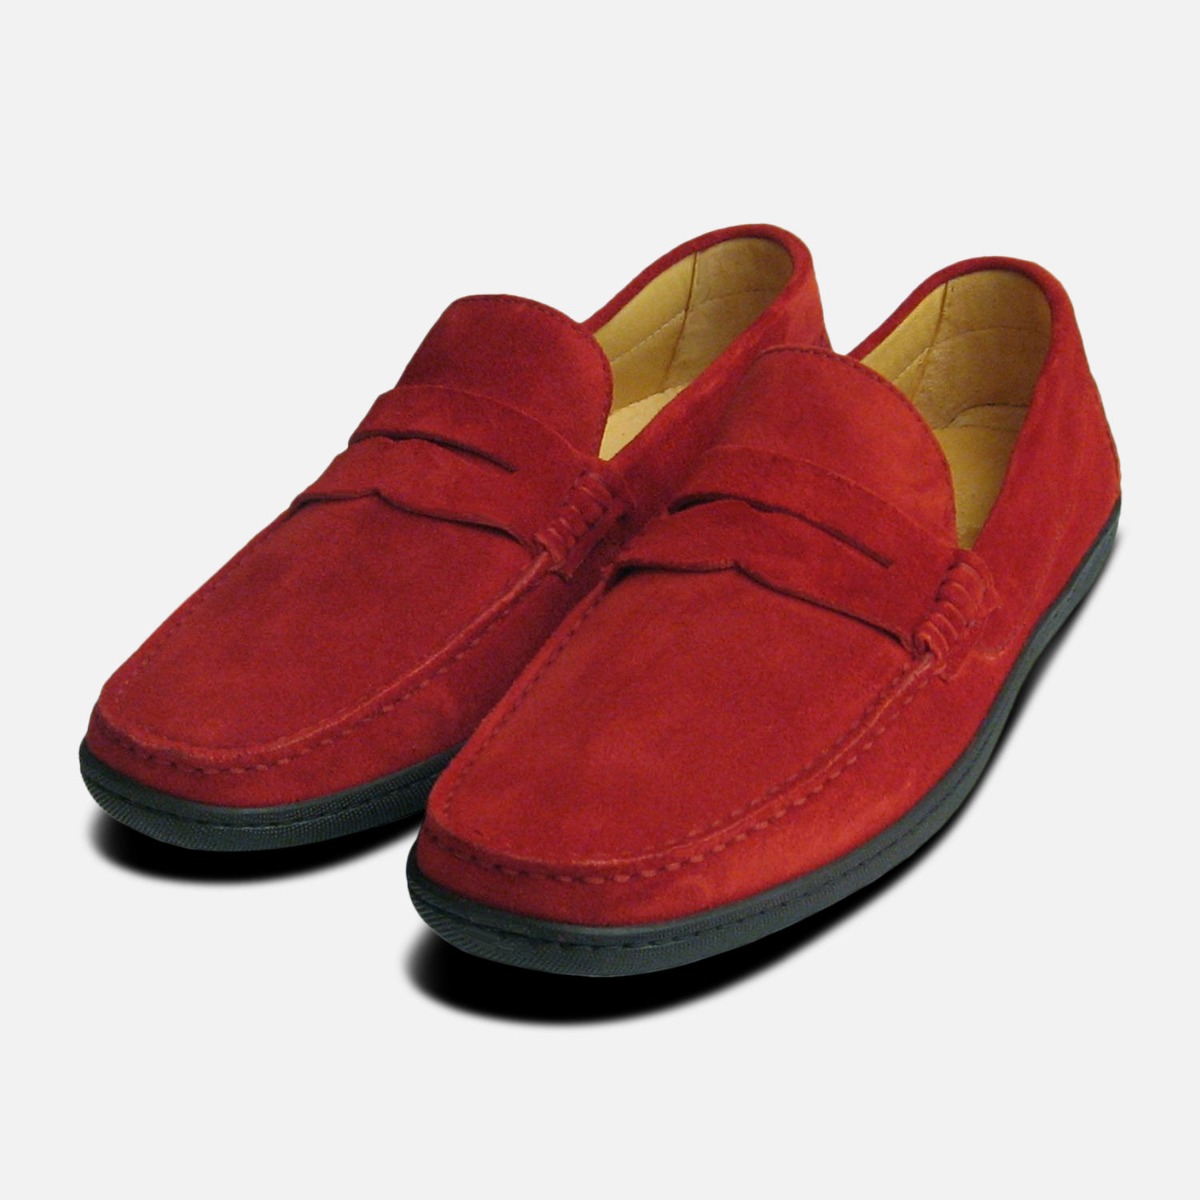 suede soled shoes